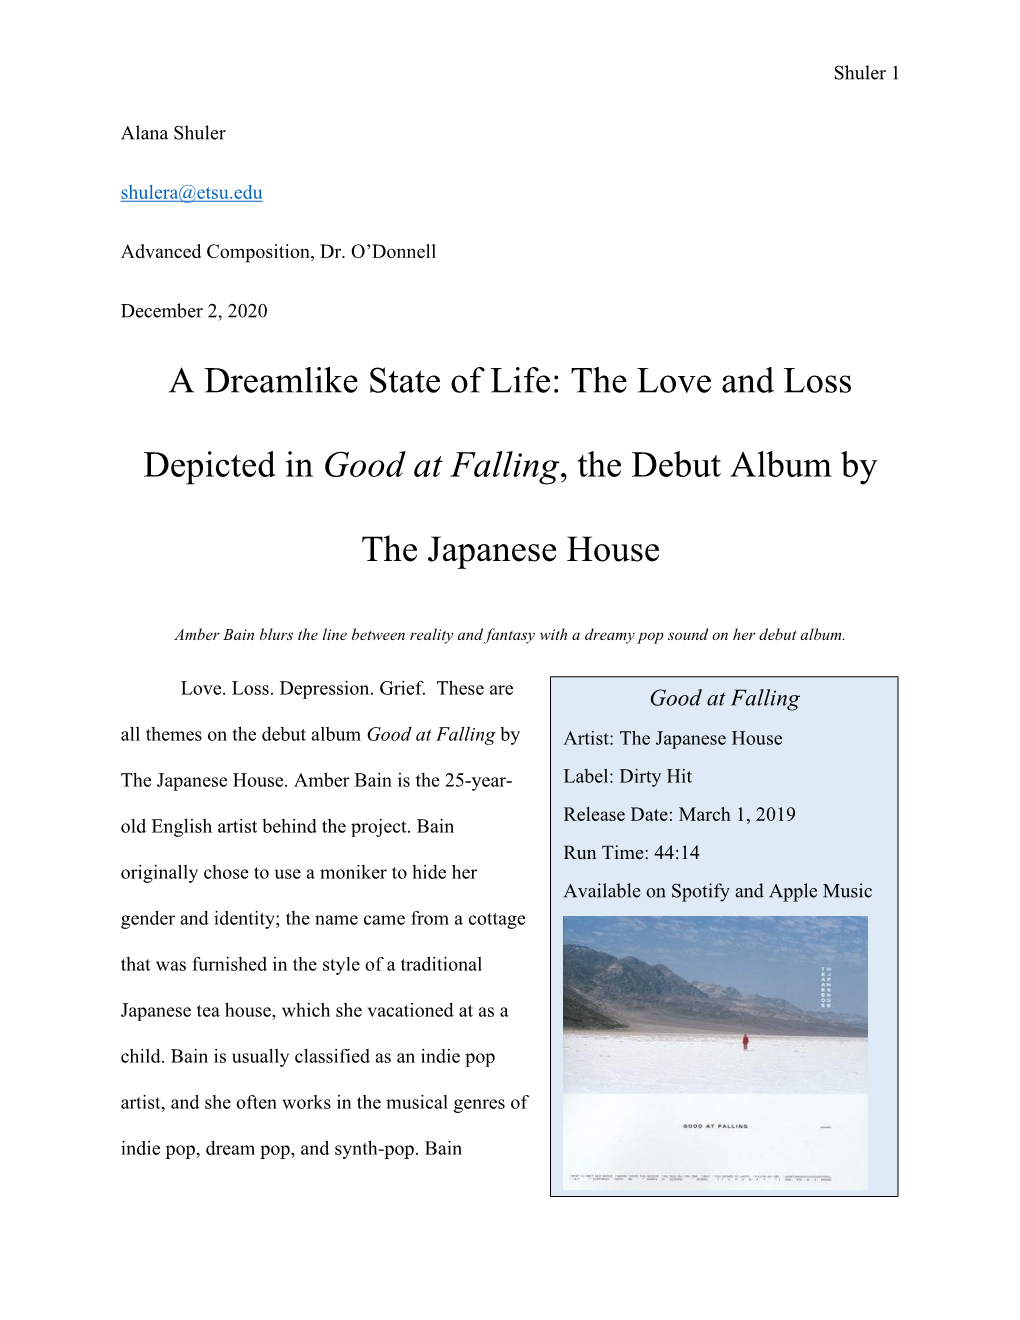 A Dreamlike State of Life: the Love and Loss Depicted in Good At